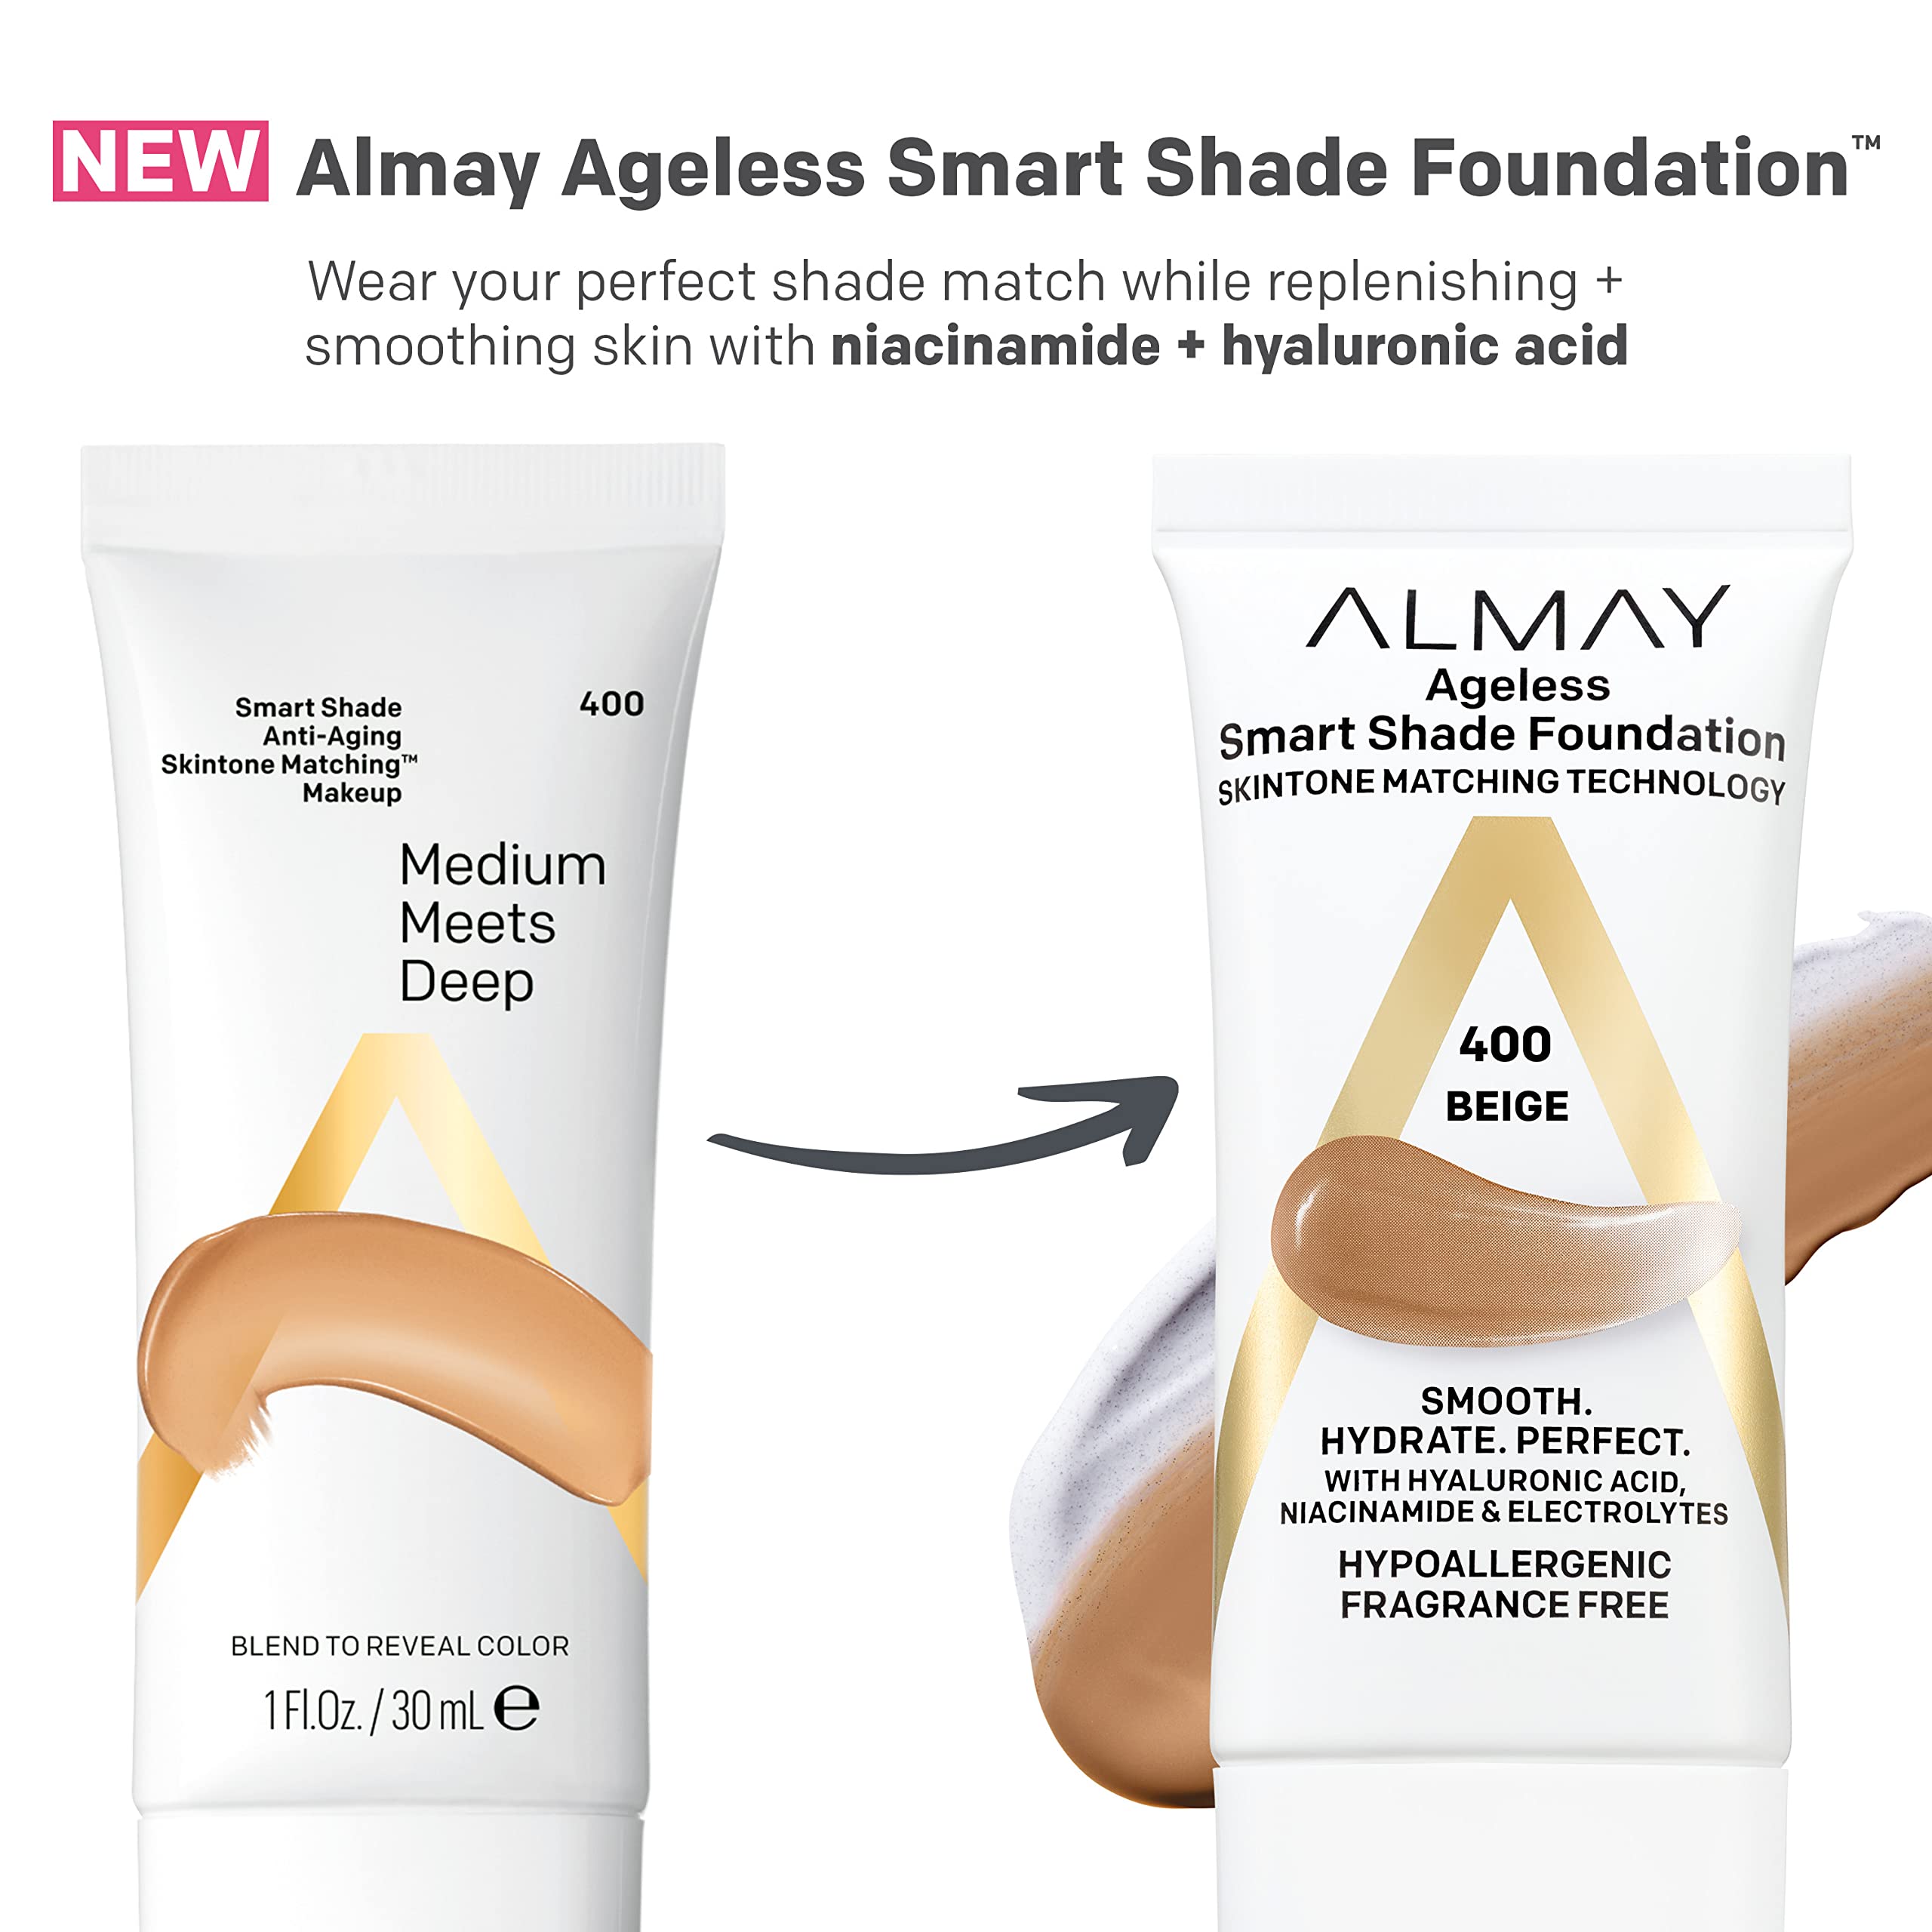 Almay Anti-Aging Foundation, Smart Shade Face Makeup with Hyaluronic Acid, Niacinamide, Vitamin C & E, Hypoallergenic-Fragrance Free, 200 Light Medium, 1 Fl Oz (Pack of 1)